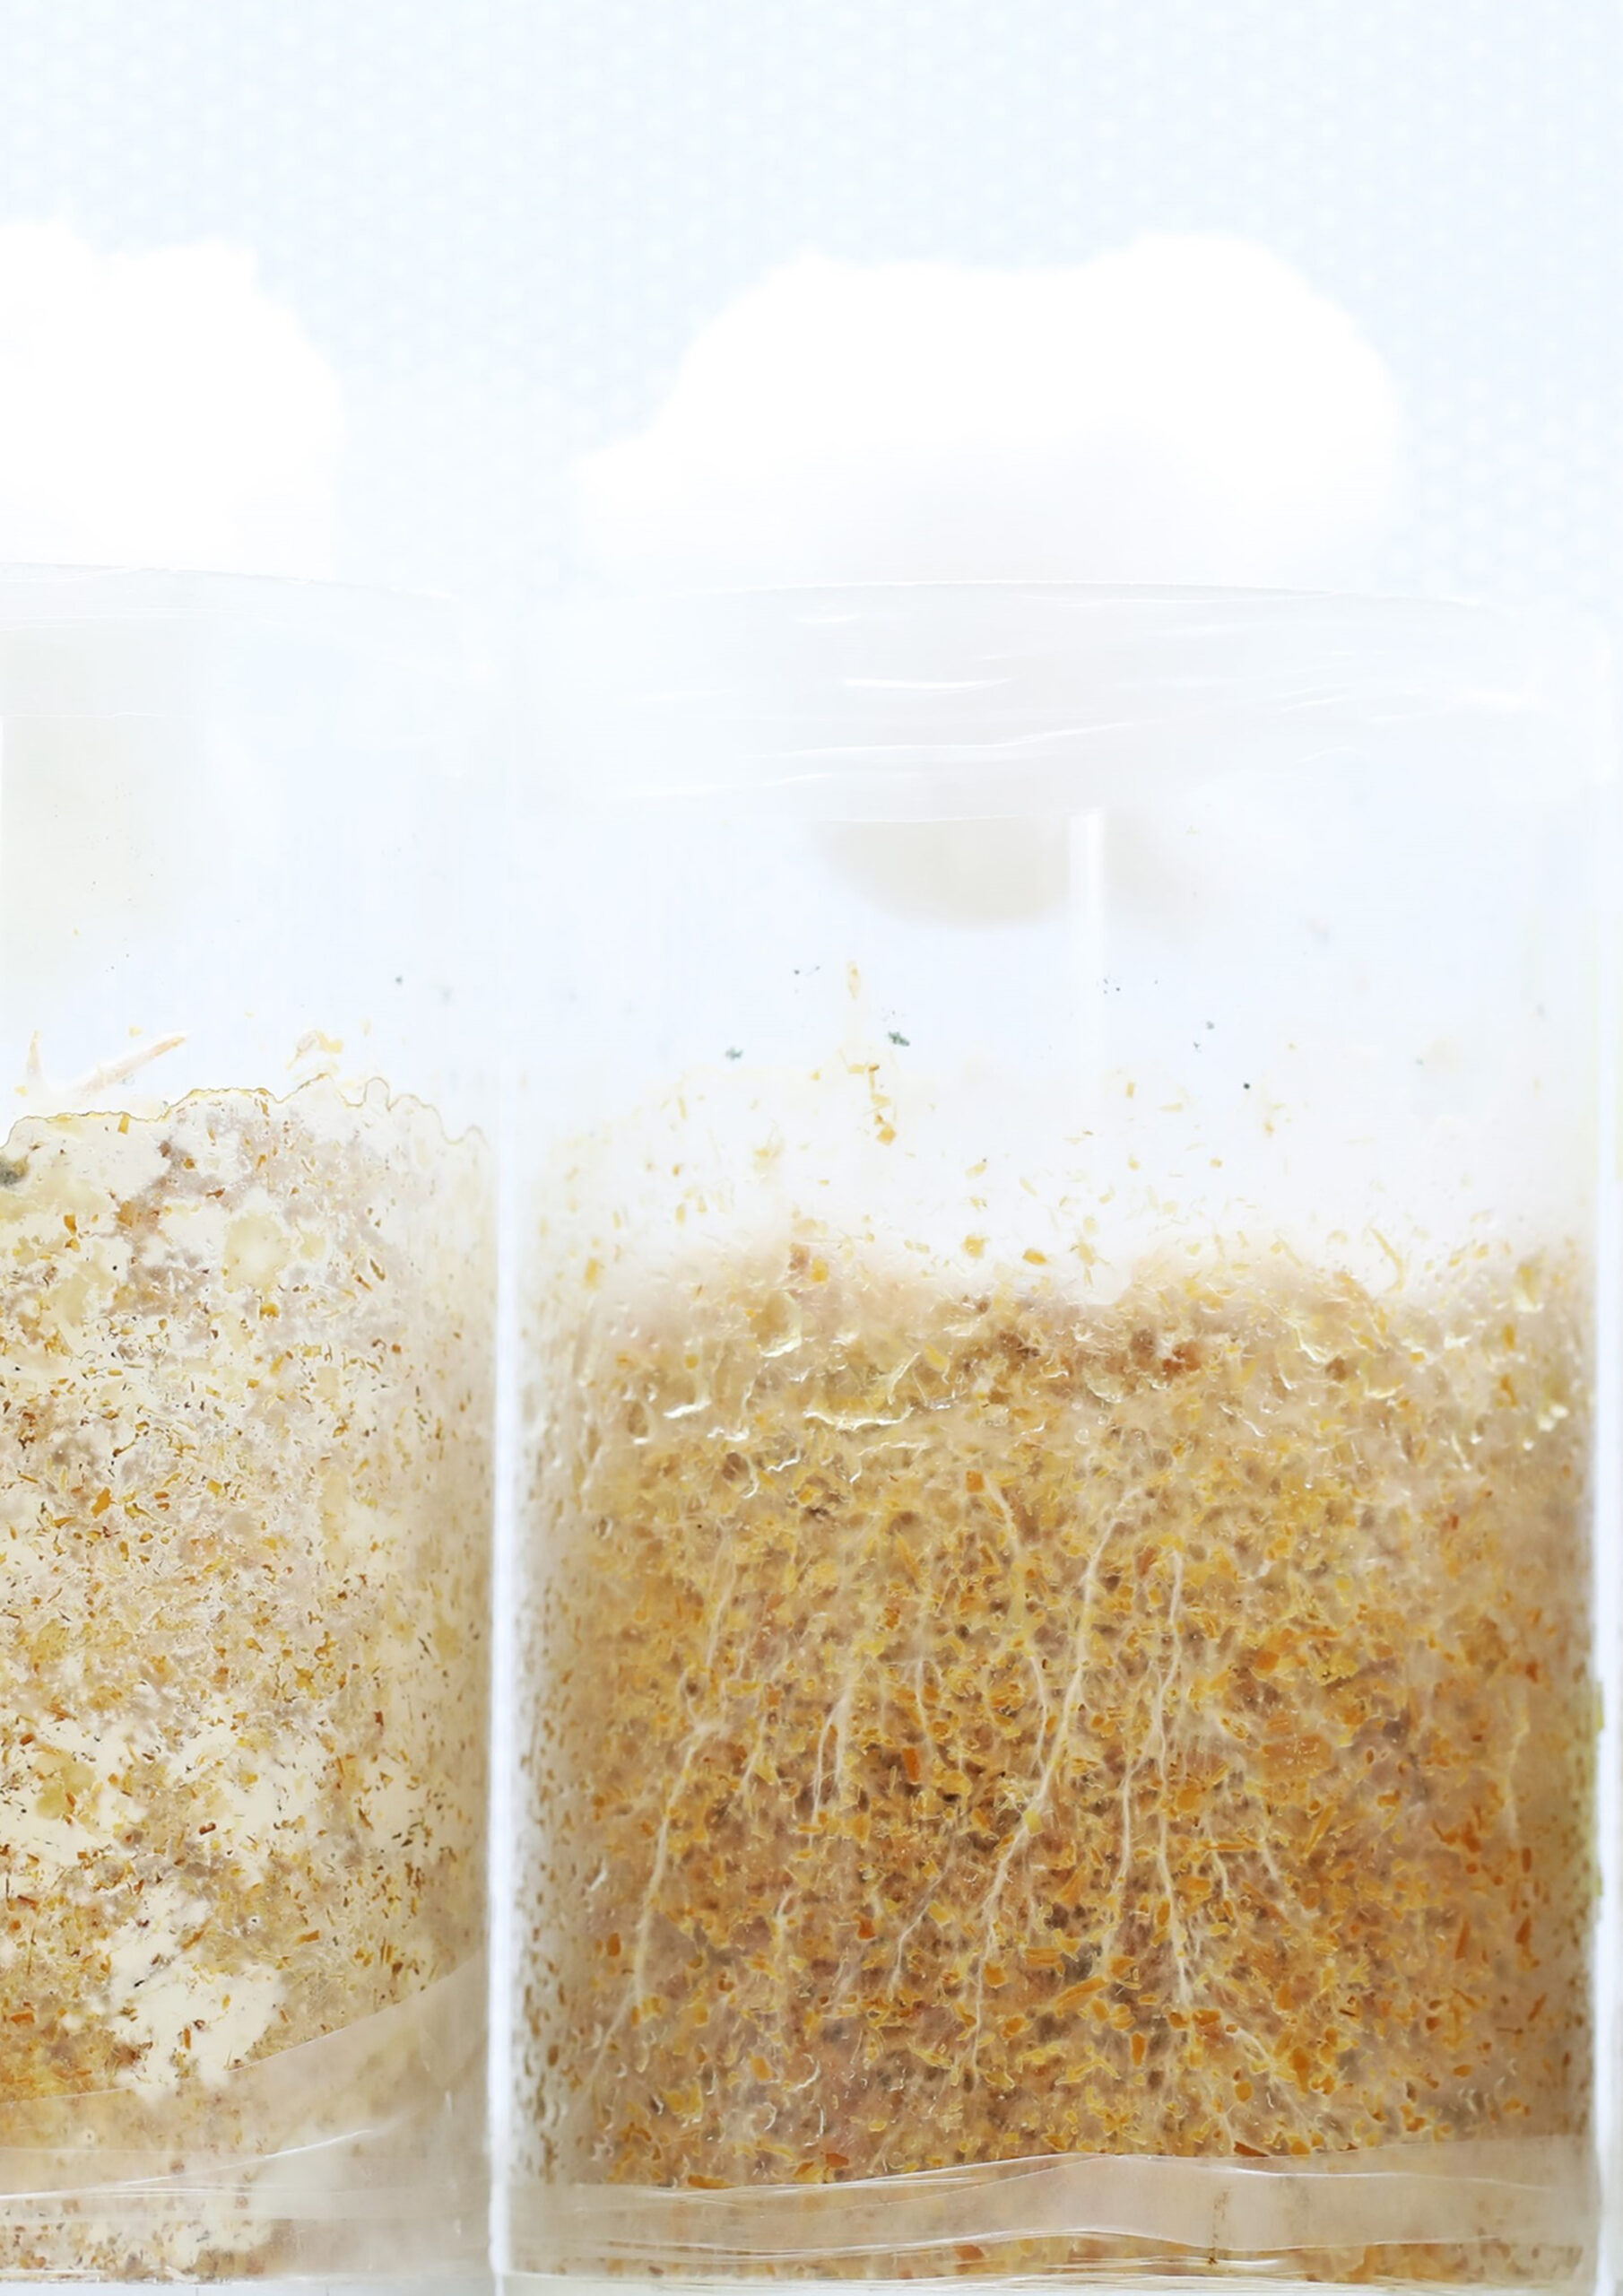 Image depicting samples with growing mycelium